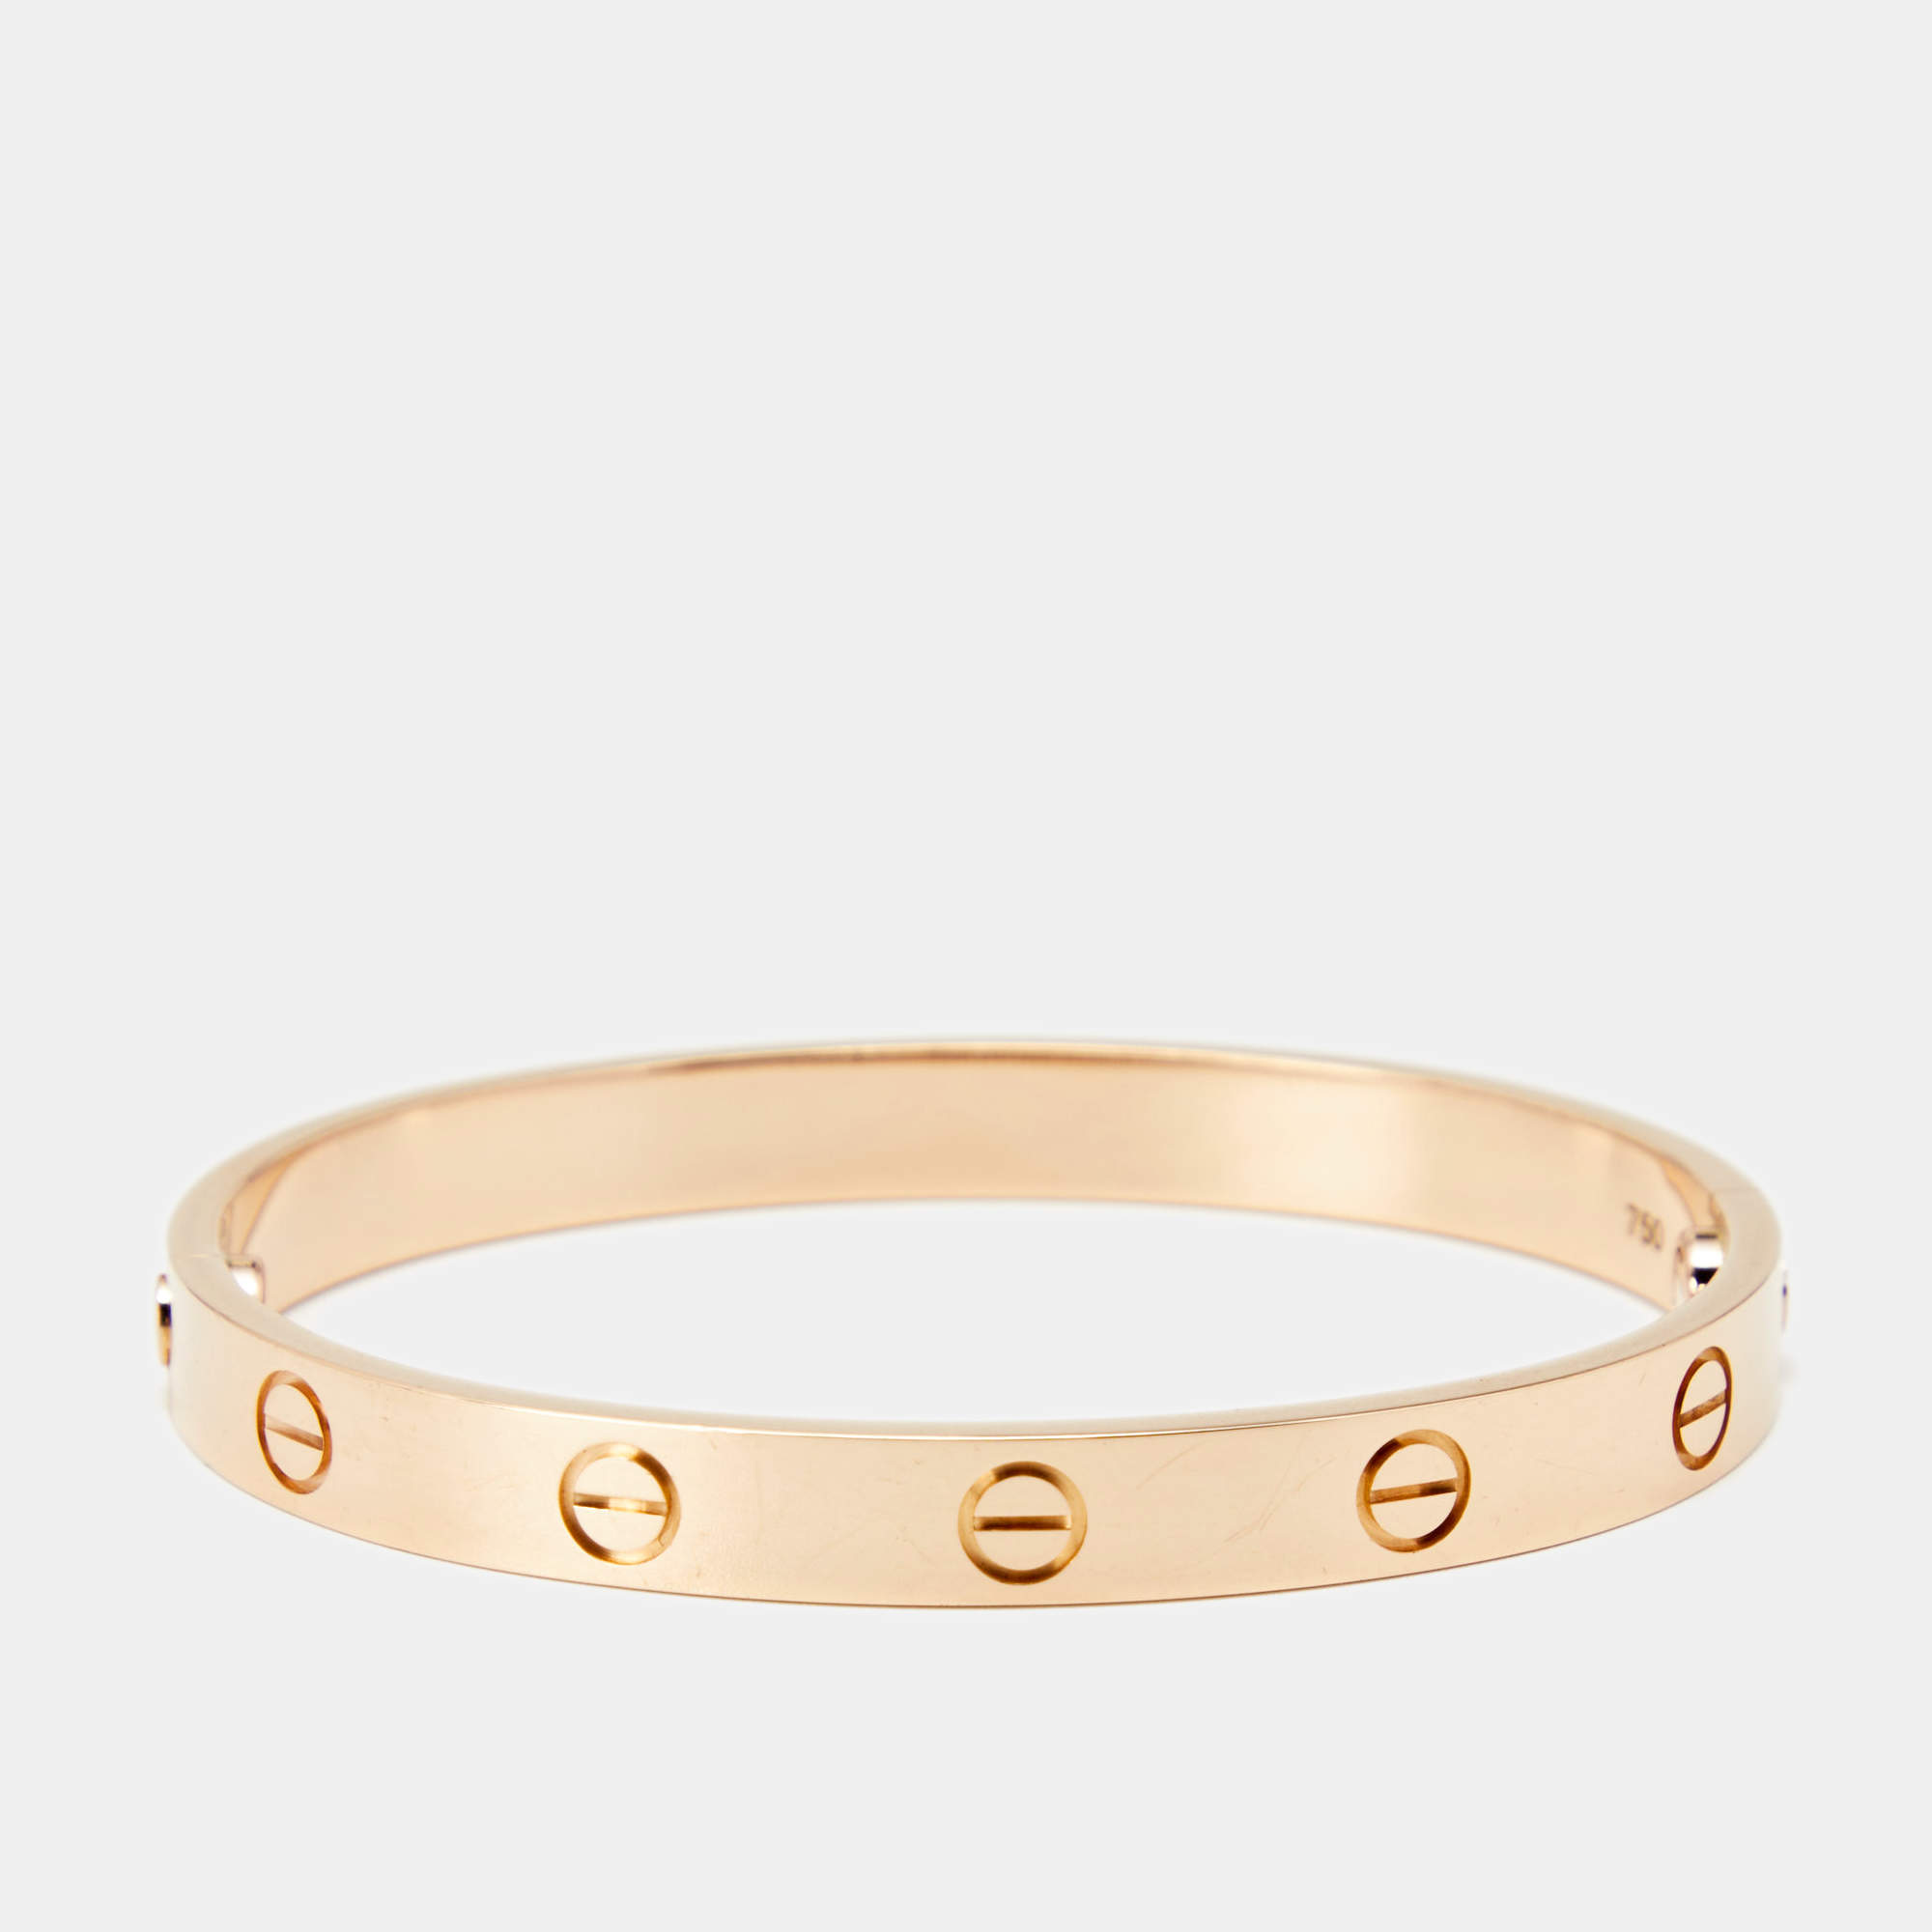 Solid 18k yellow gold, Cartier love bracelet Size 15-21cm Still in stock!  Gold weight about 30-32g | Cartier love bracelet, Gold jewelry fashion,  Bracelet sizes